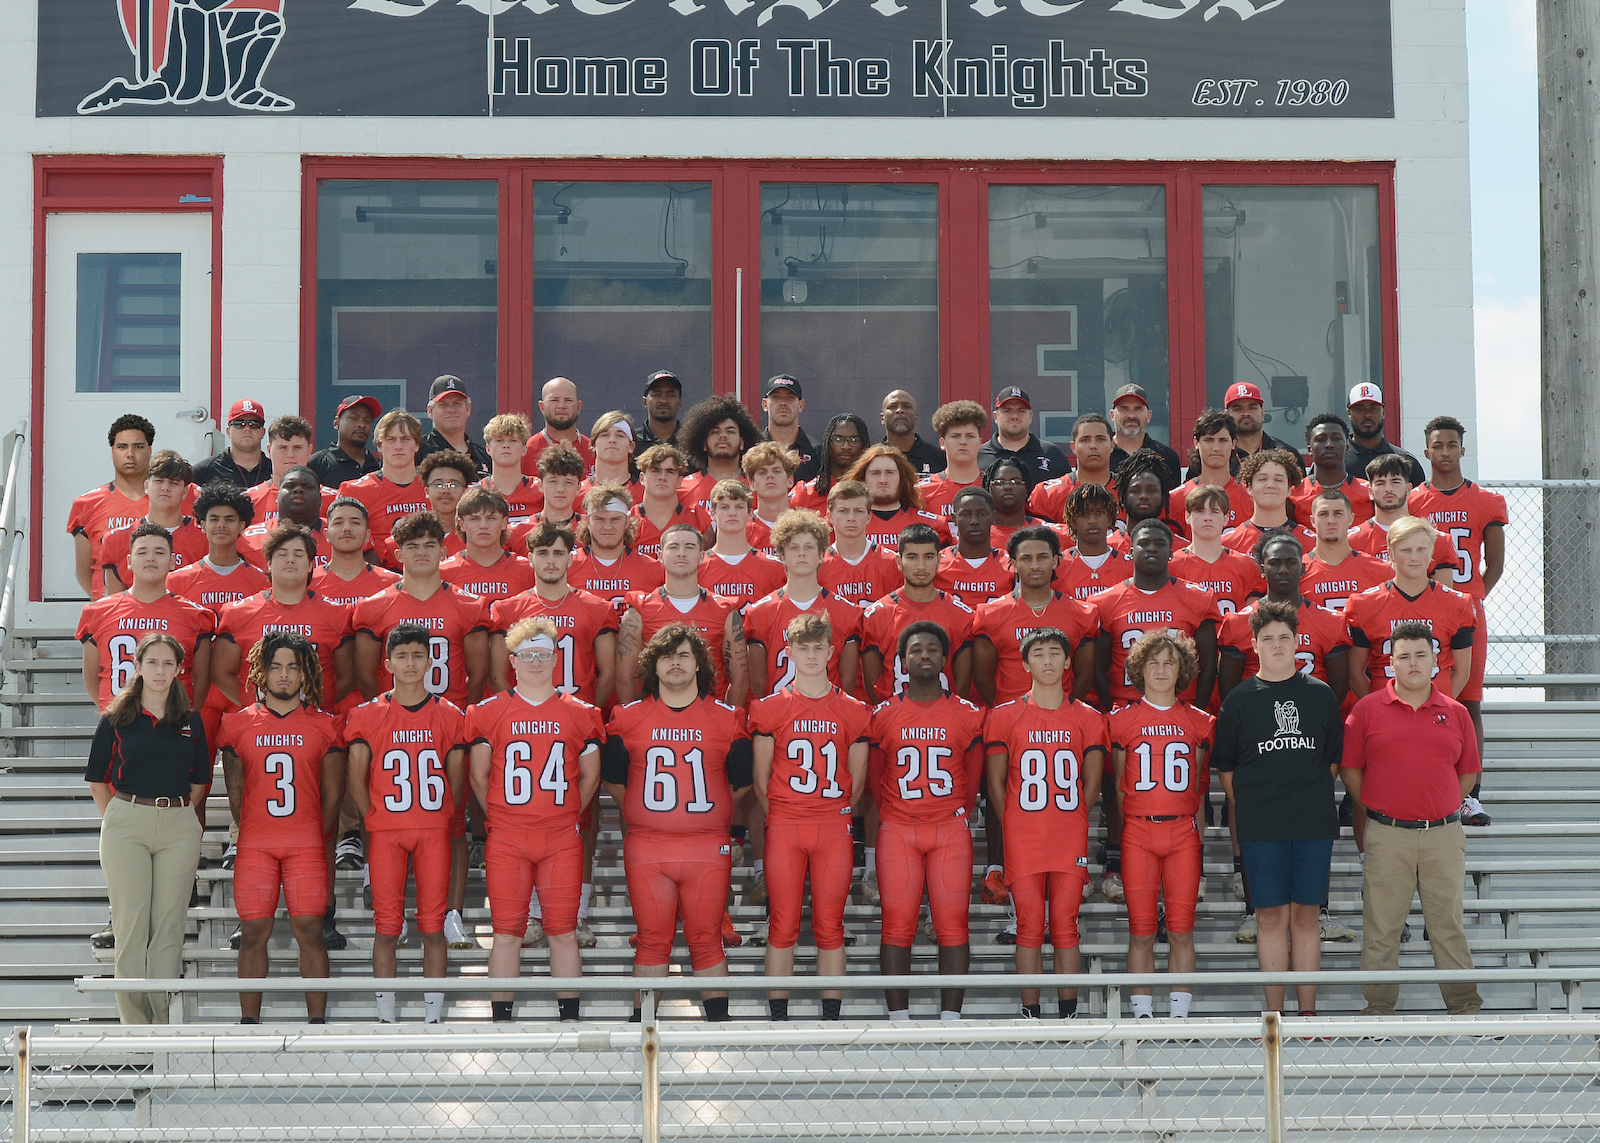 blhs p1001 Football_ 5x7  For Email(1).png